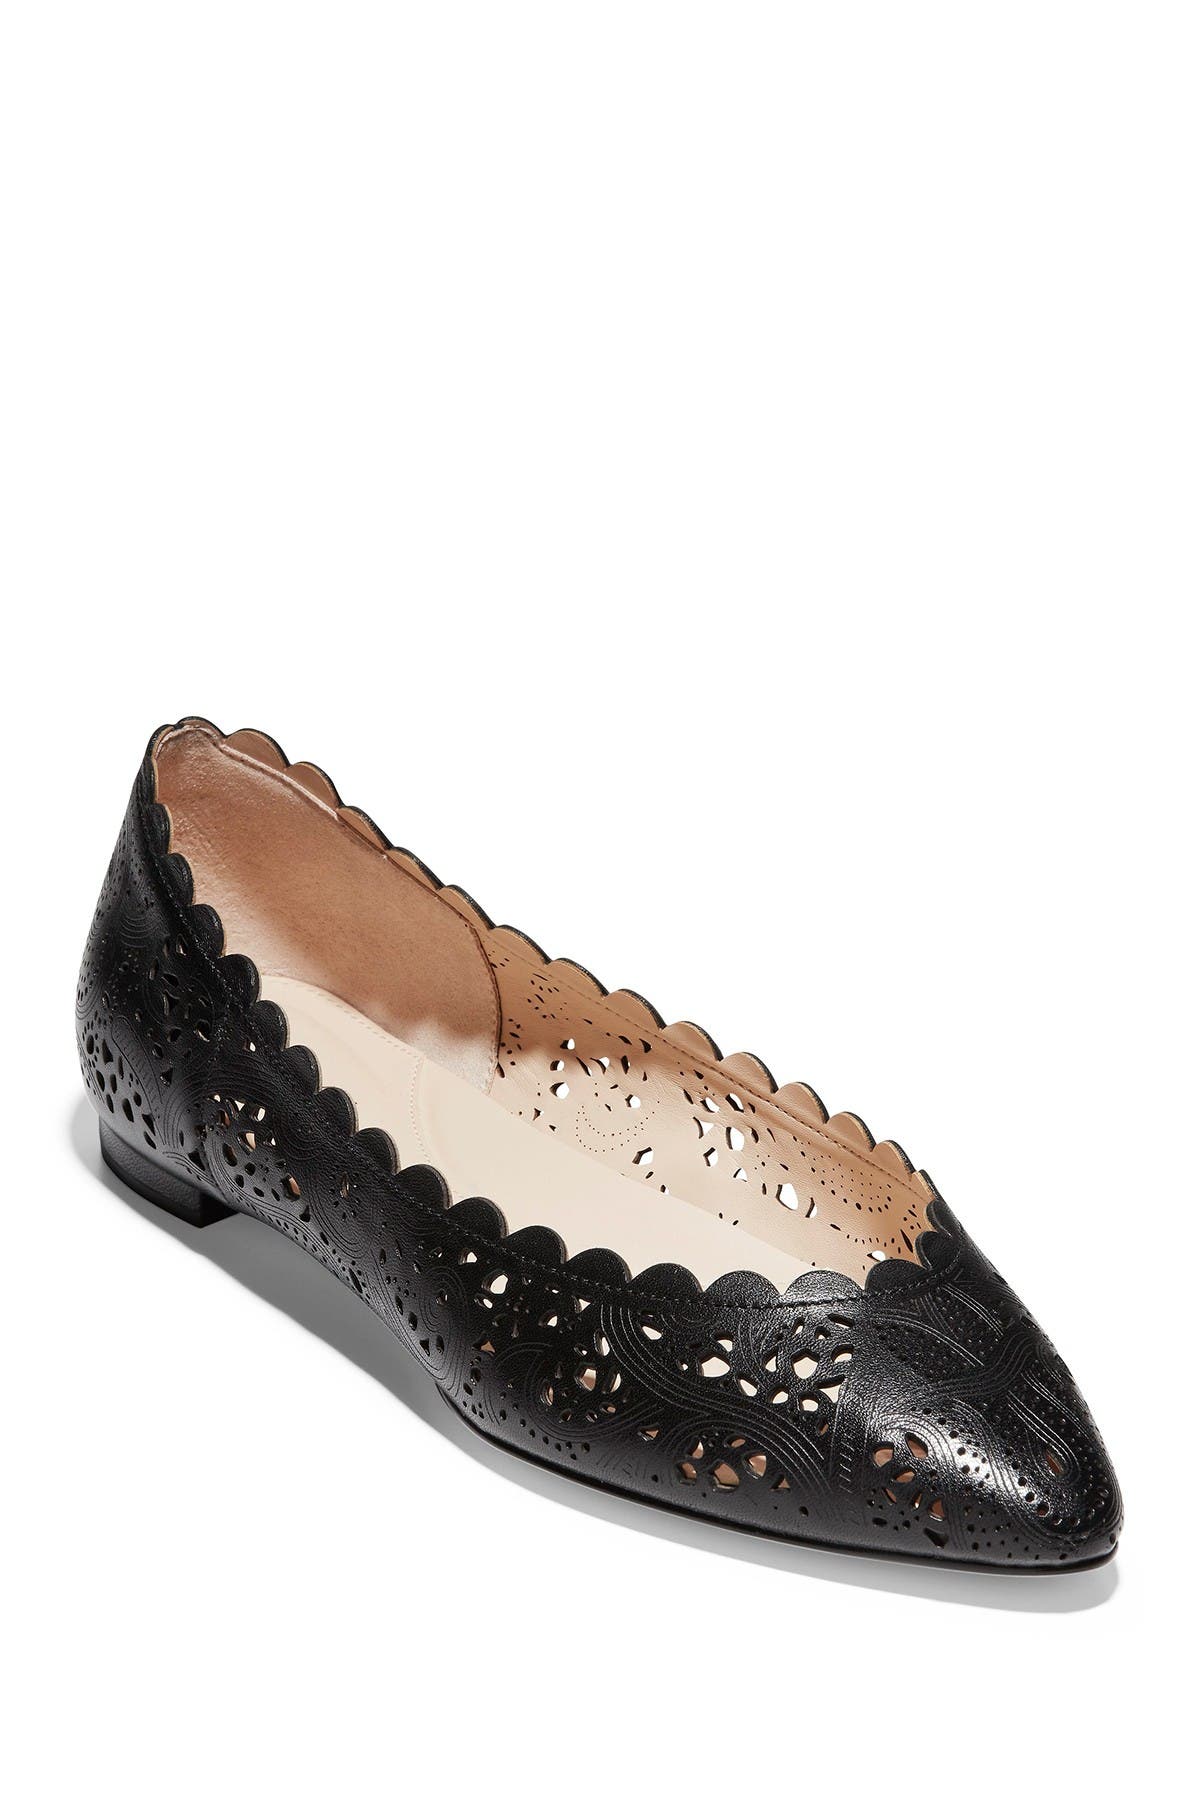 Cole Haan | Grand Ambition Callie Flat 